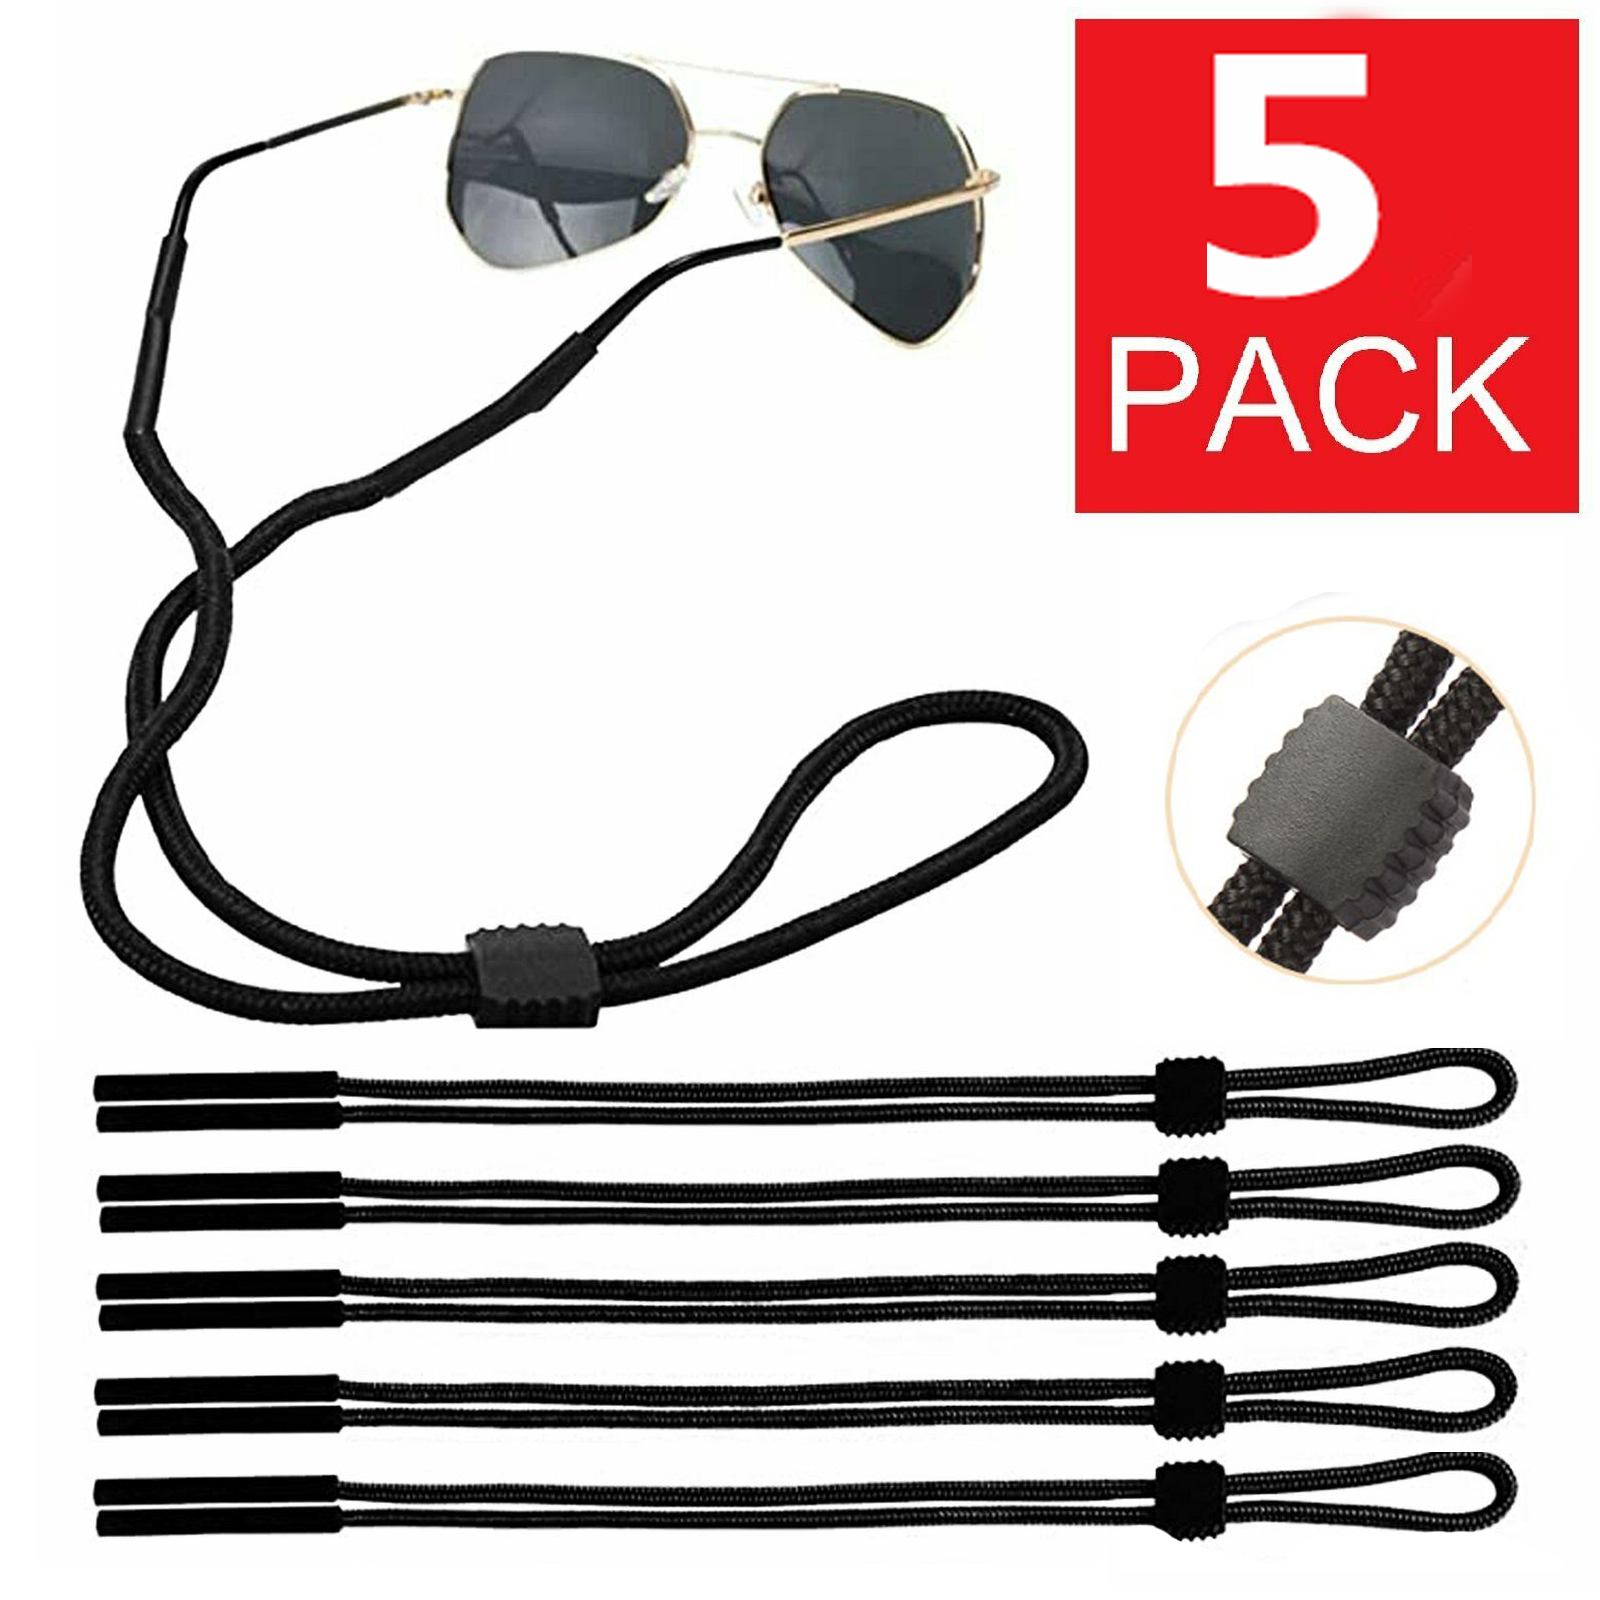 5-Pack Sport Sunglass Neck Strap Eyeglass Read Glasses Neck Cord Lanyard Holder Unbranded Does Not Apply